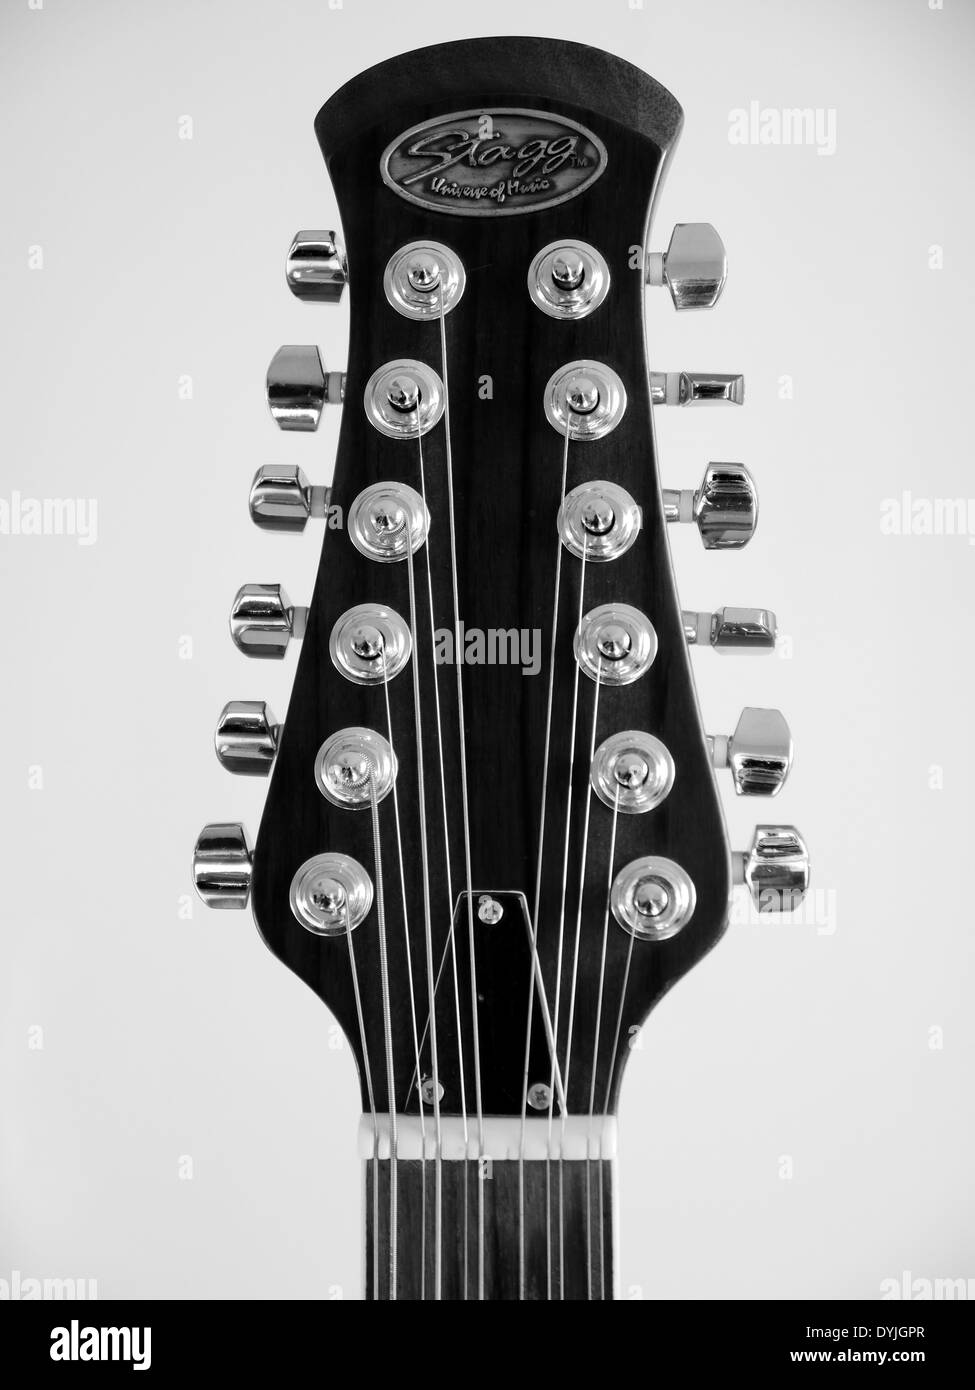 Head-stock of 12 string Stagg electro/acoustic guitar - front view - monochrome Stock Photo